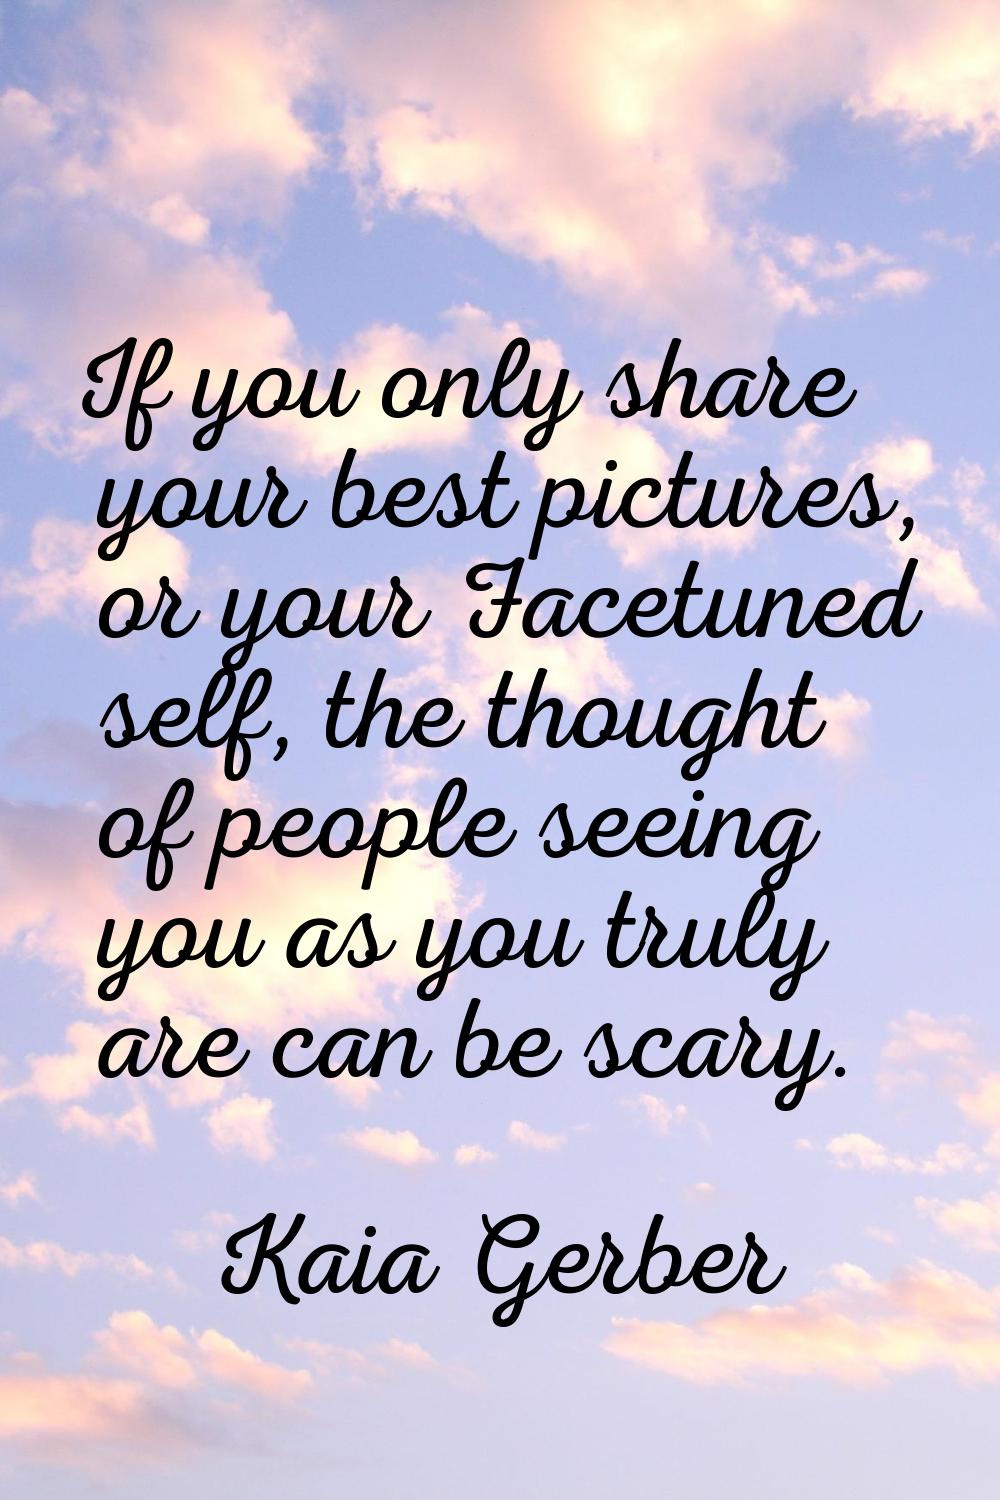 If you only share your best pictures, or your Facetuned self, the thought of people seeing you as y